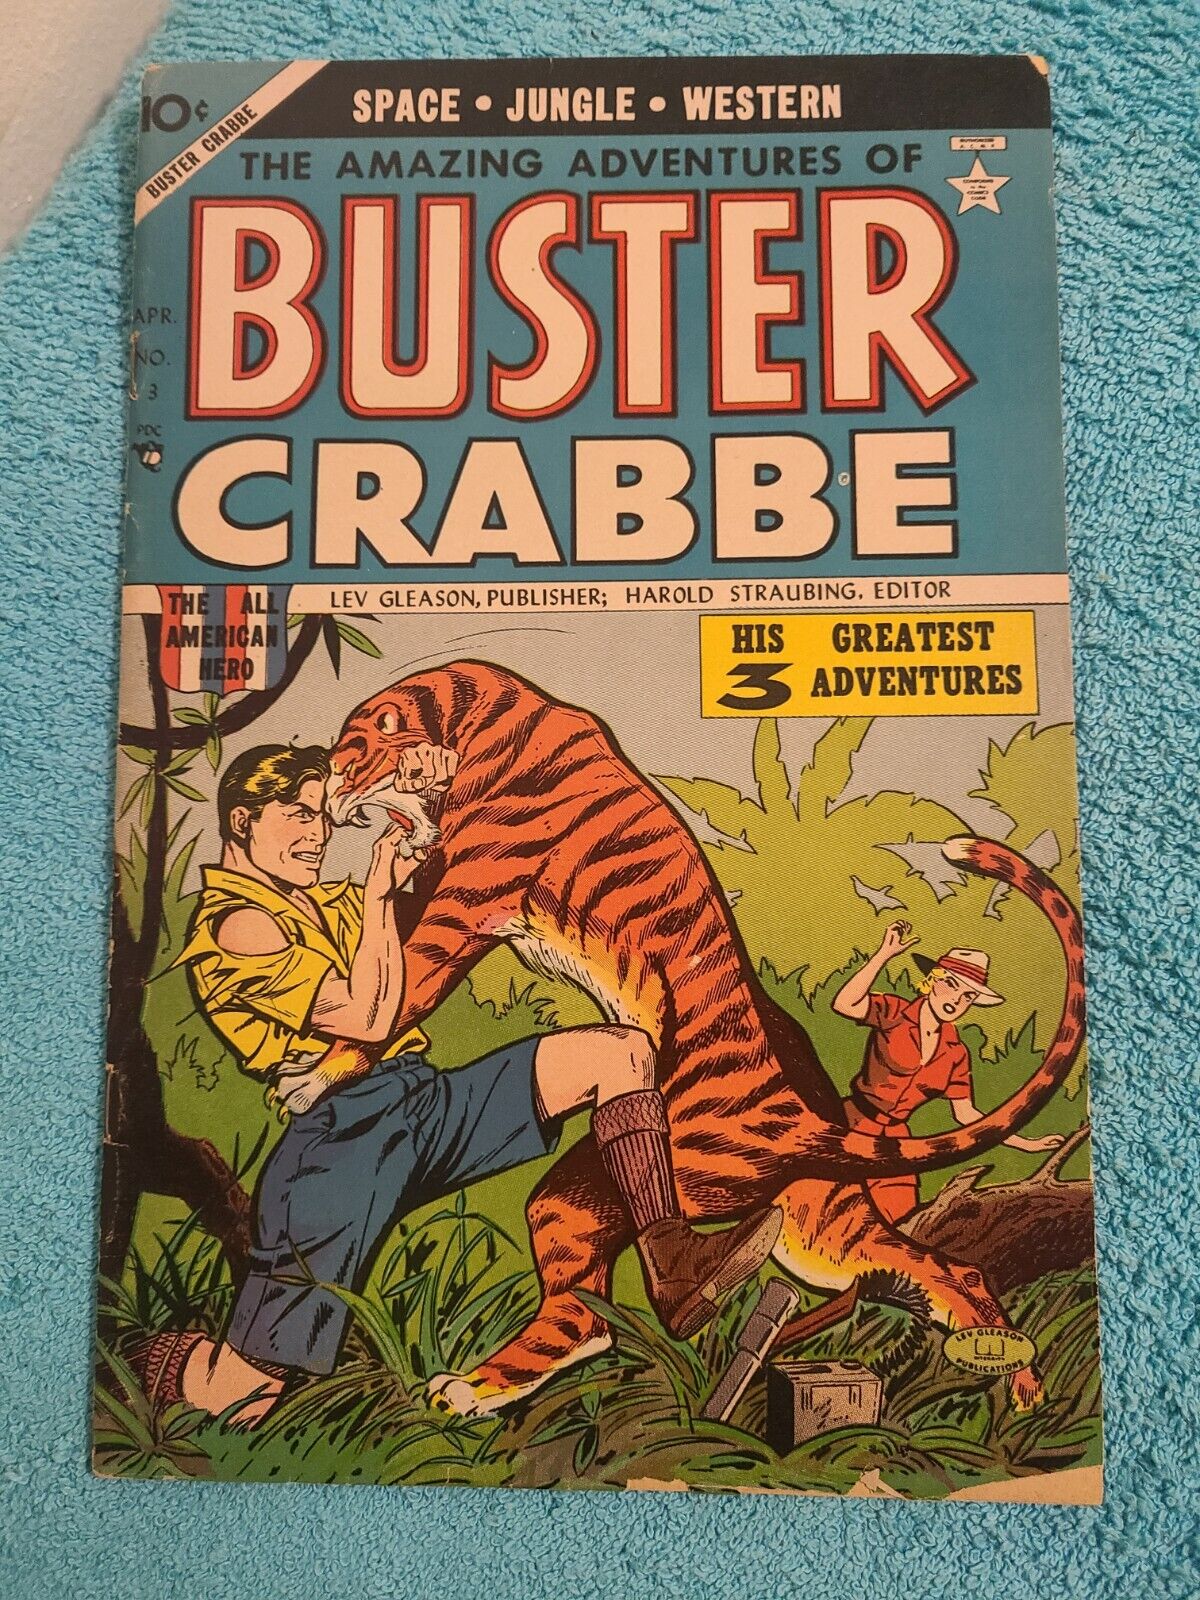 Buster Crabbe #3 1954-Lev Gleason-Tiger fight 